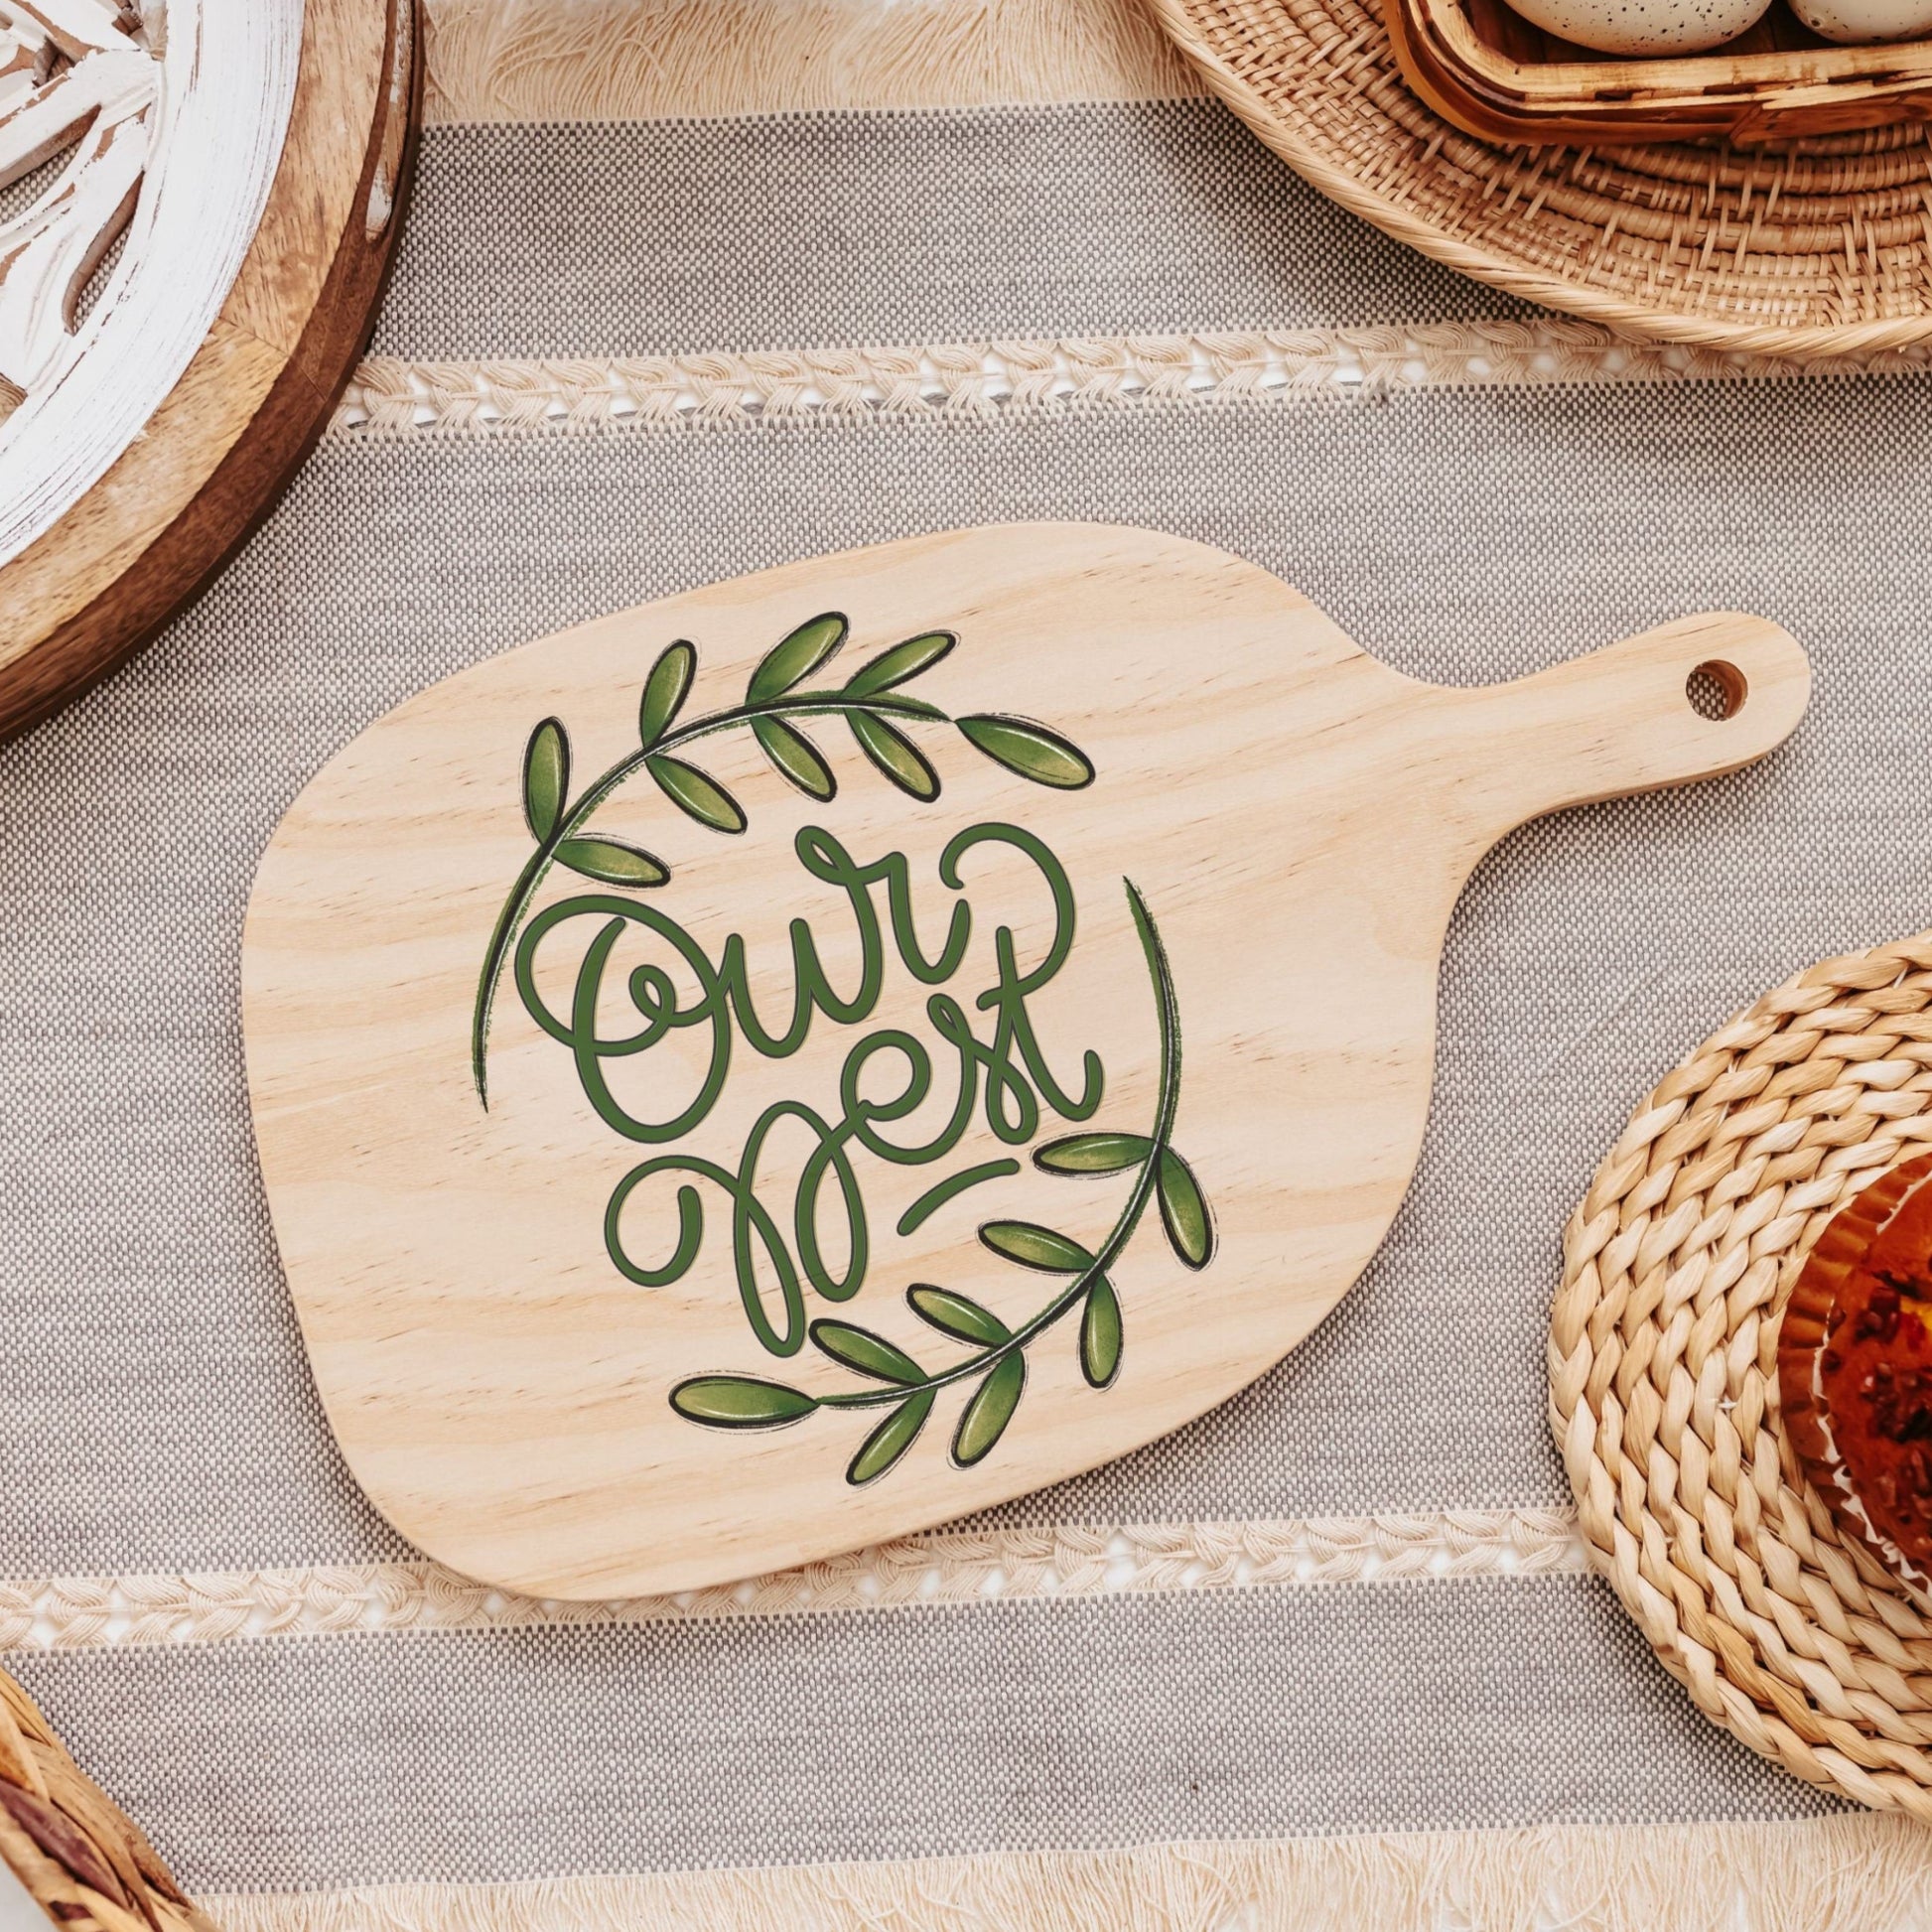 Our nest wood cutting boards